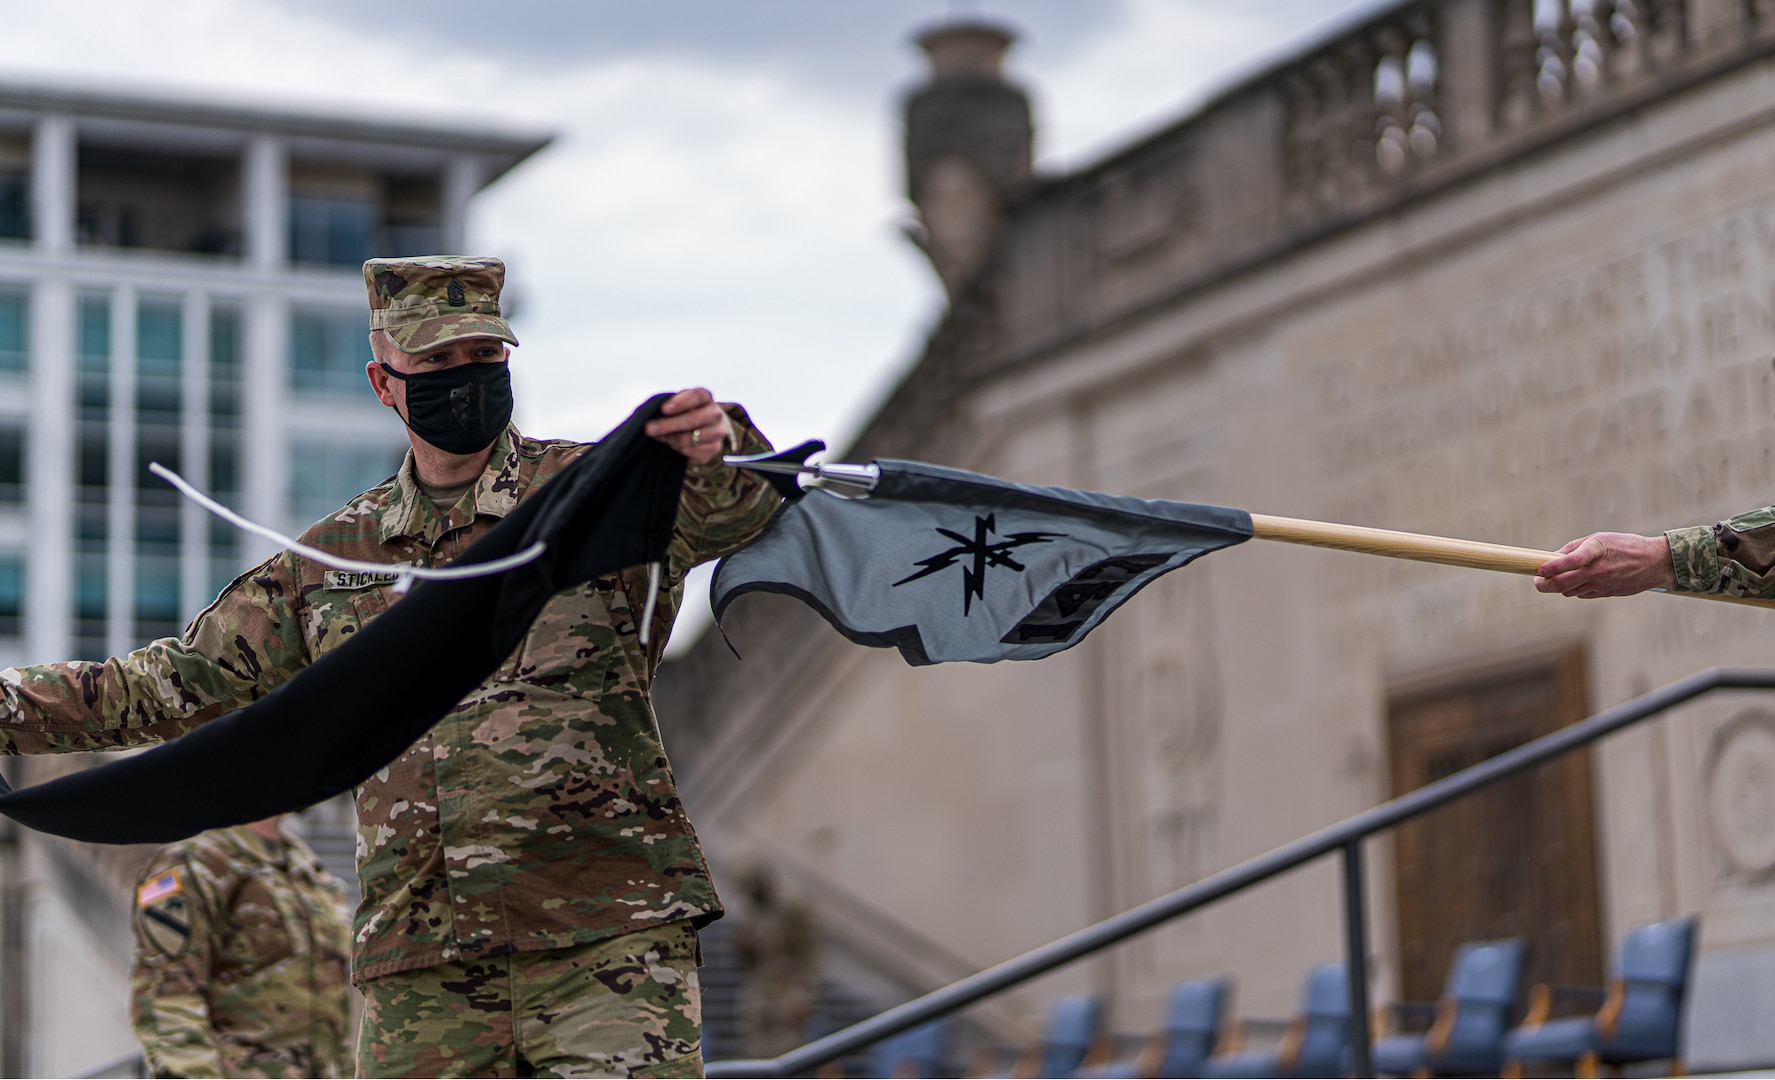 1st Sgt. John Stickler uncases one of Indiana National Guard’s new 127th Cyber Protection Battalion guidons at the Indiana War Memorial Oct. 3, 2020. The battalion of nearly 100 Citizen-Soldiers protects military networks and service members from internet-based and online attacks.